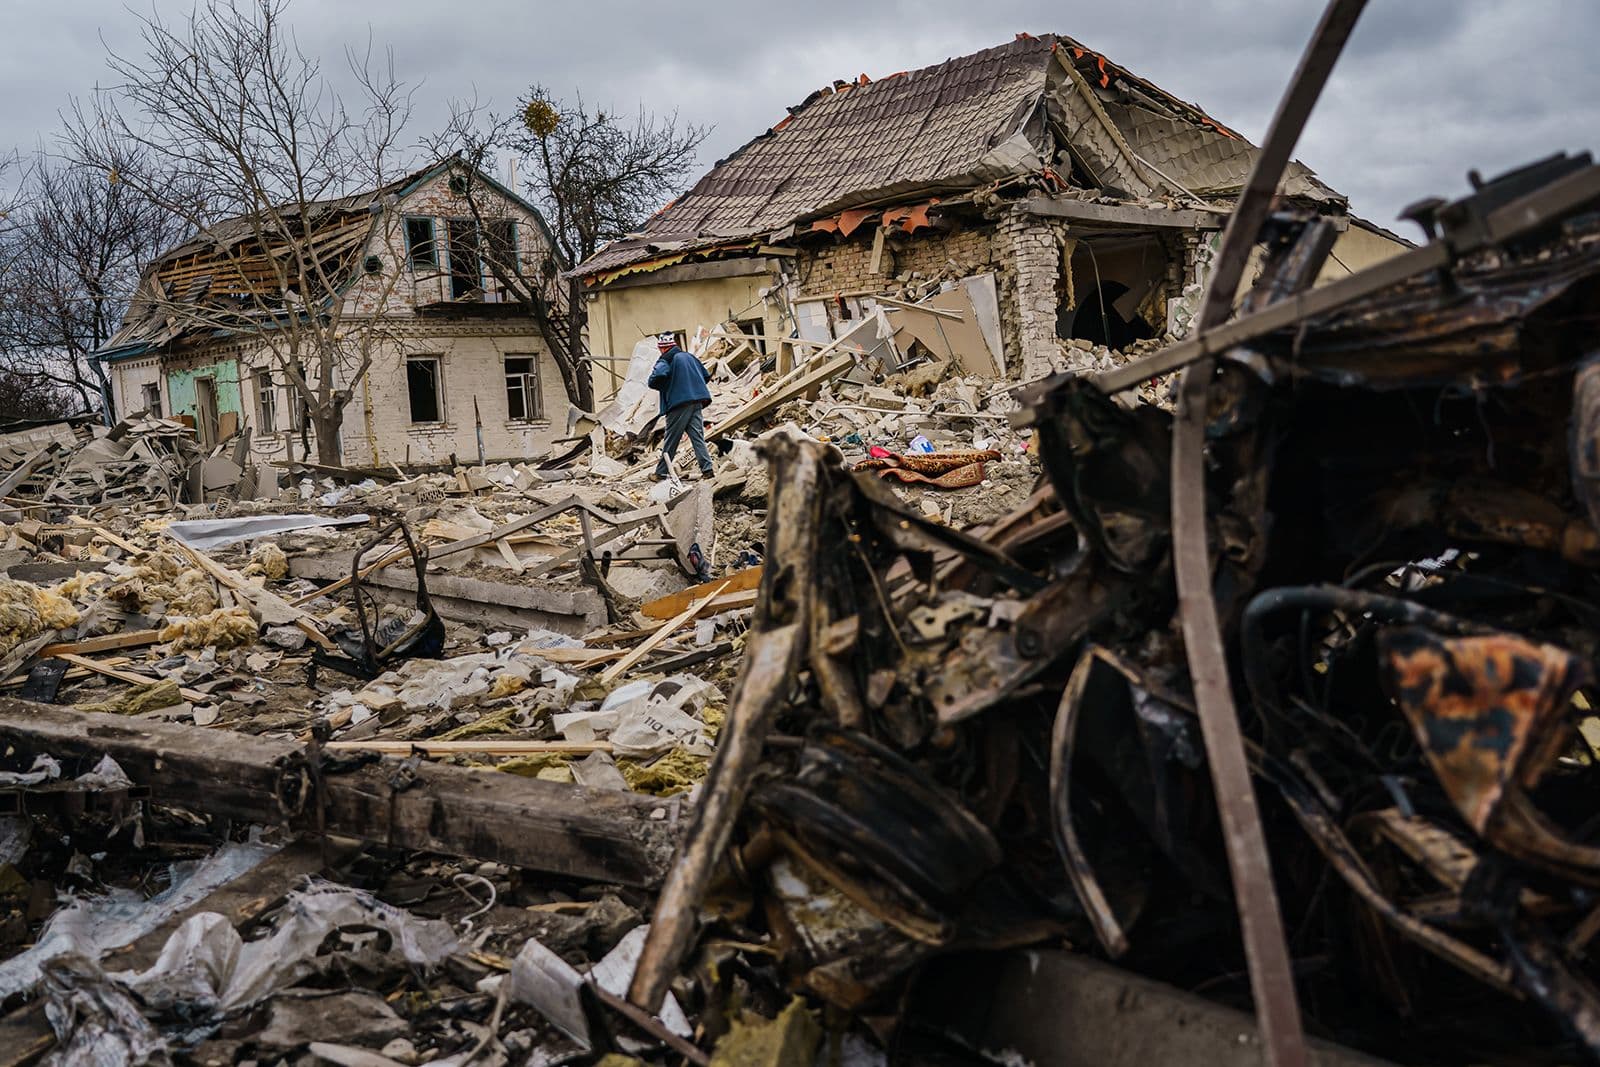 Local residents help clear the rubble of a home that was destroyed by a suspected Russian airstrike in Markhalivka